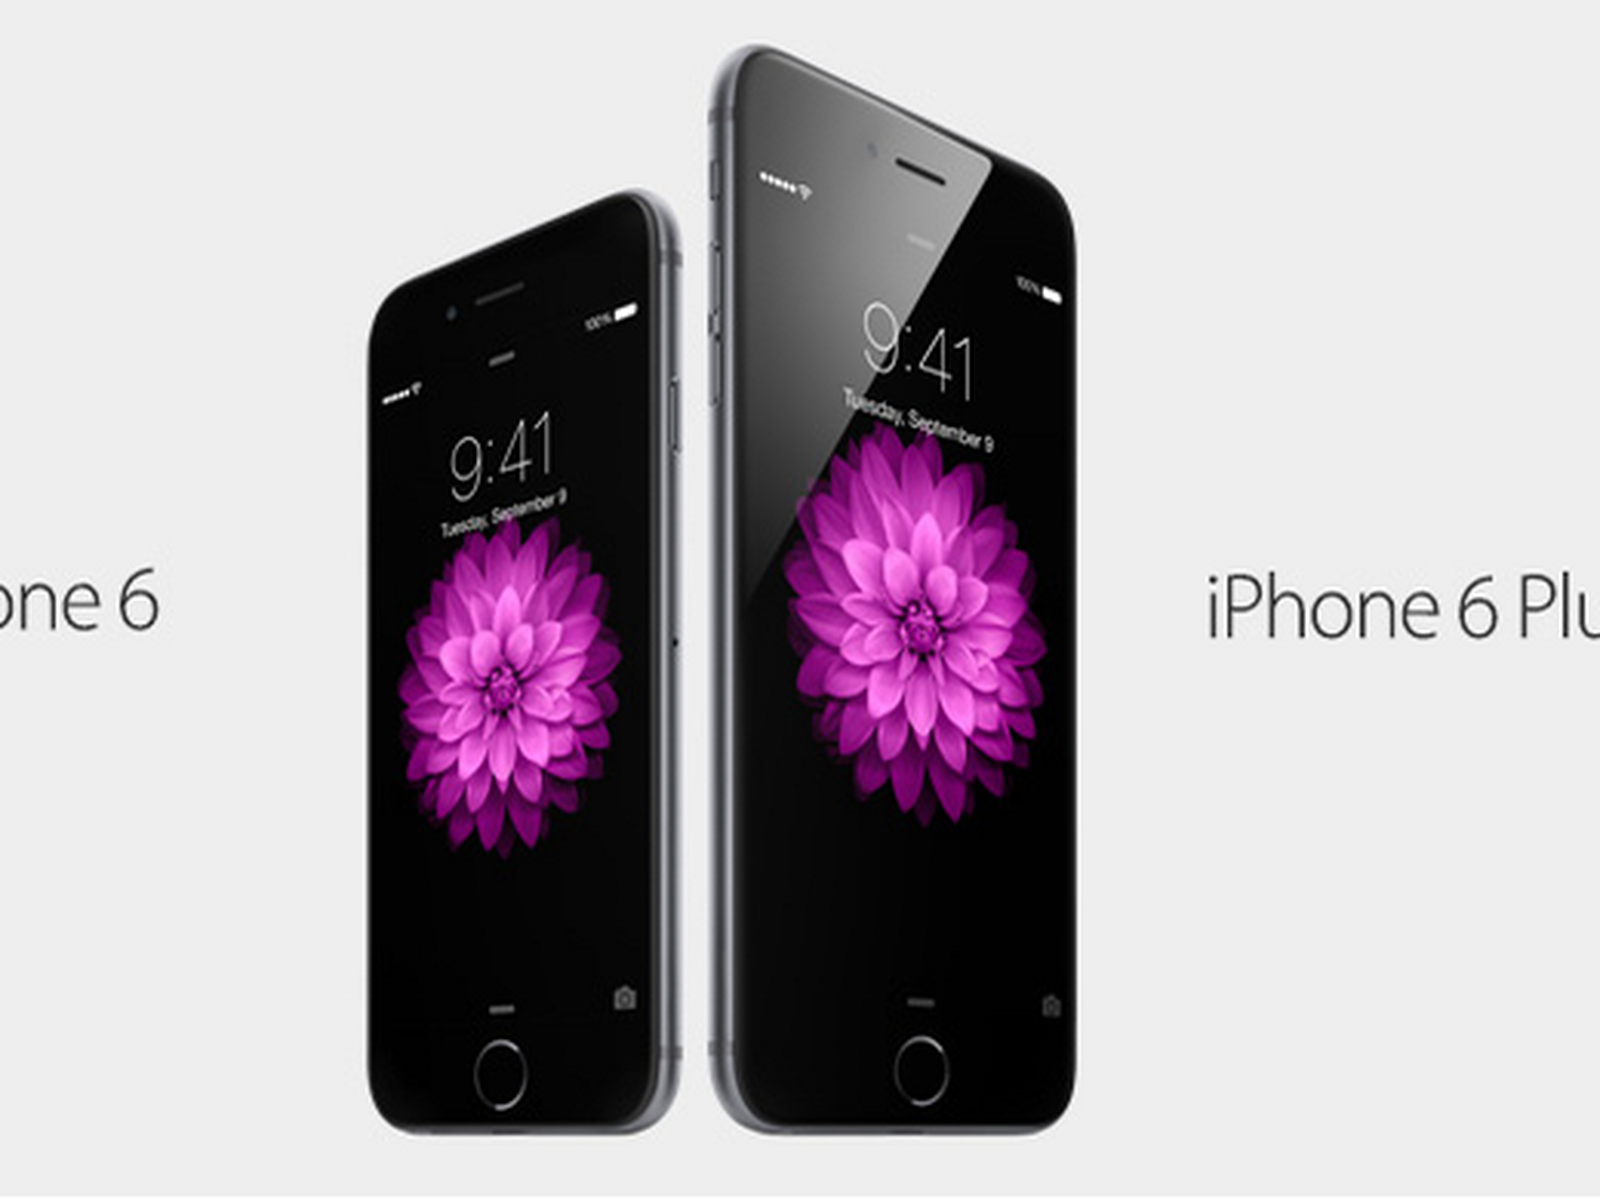 indre Undertrykke Forretningsmand iPhone 6 and iPhone 6 Plus Sales Top Ten Million in Launch Weekend -  MacRumors